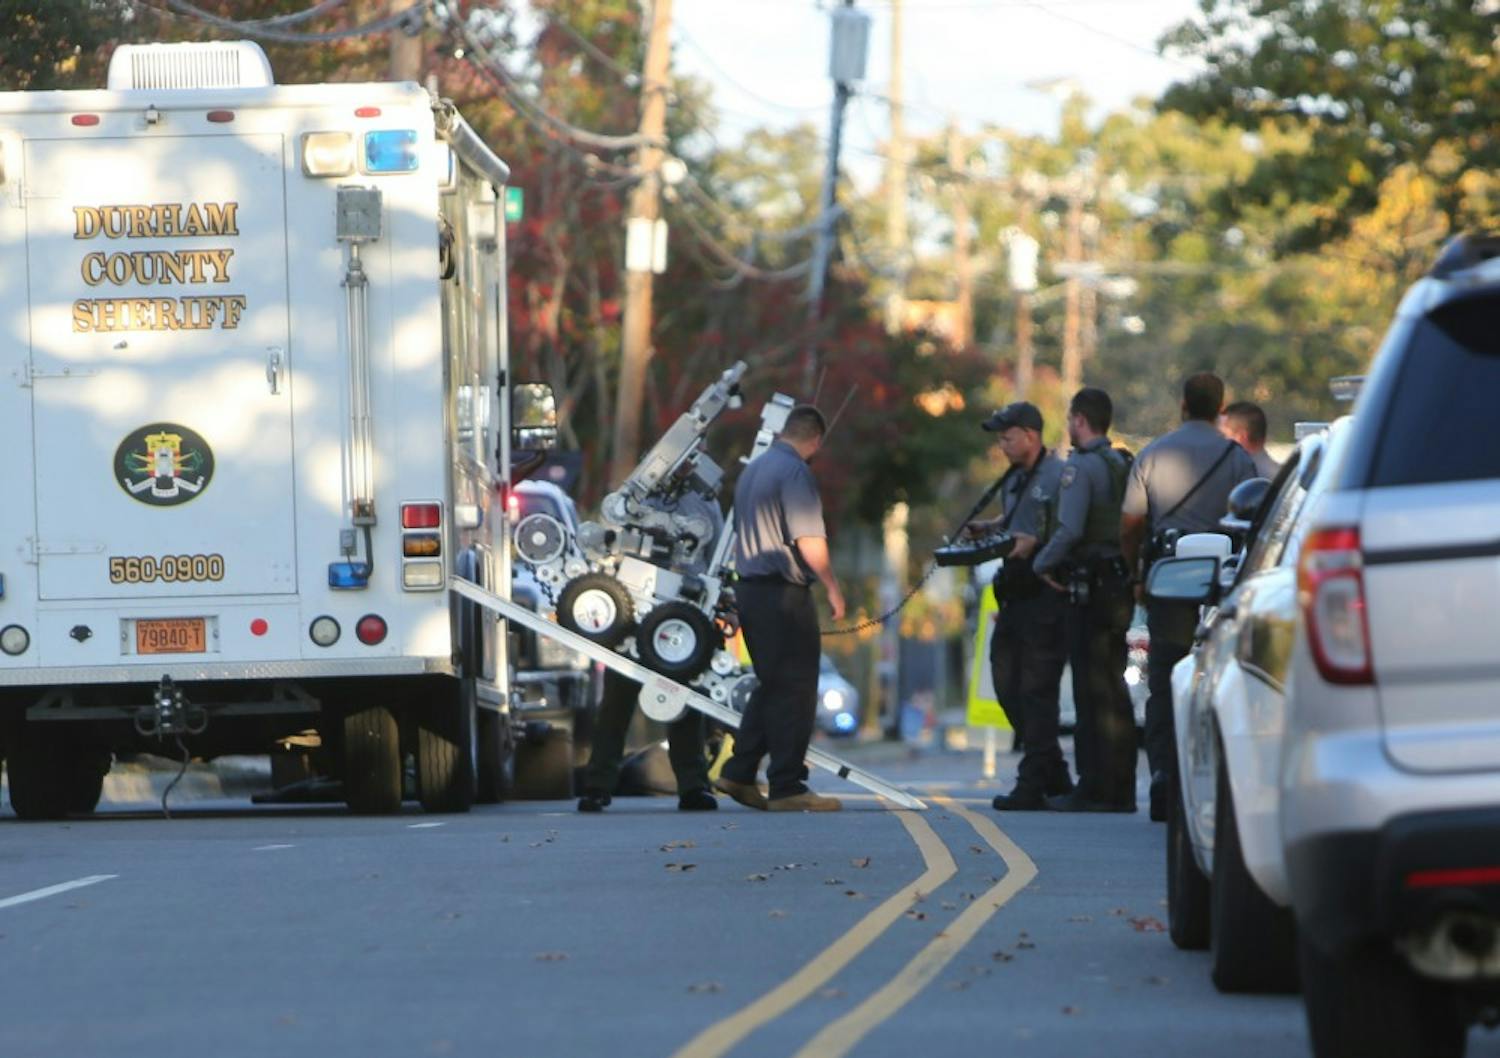 Durham County Bomb Squad deploys a bomb robot on Weaver St. in Carrboro in connection to the explosion at McCorkle Place on Thursday afternoon.  